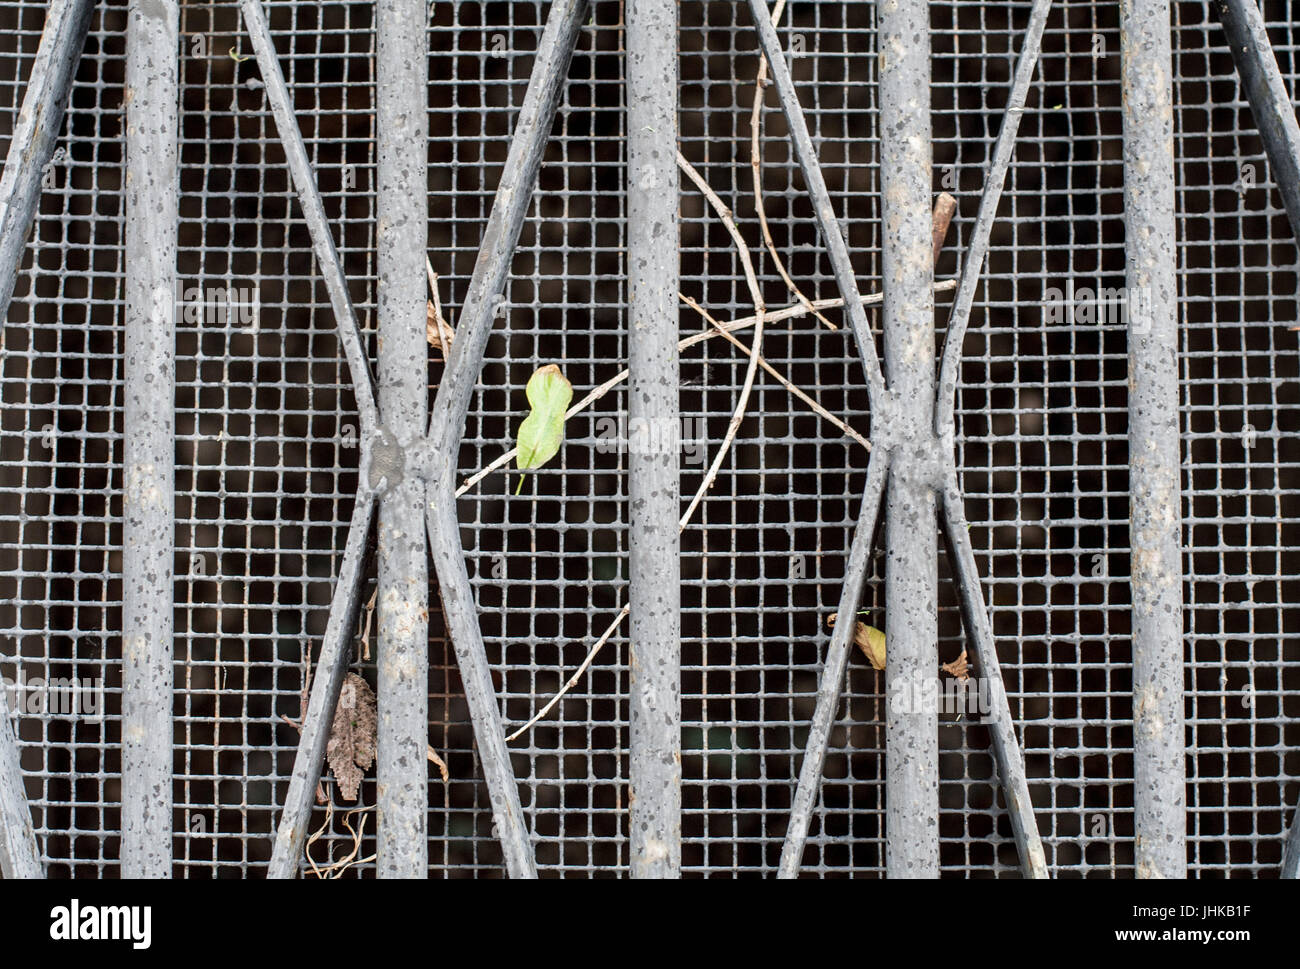 sewer/ventilation grid with leaves and sticks Stock Photo